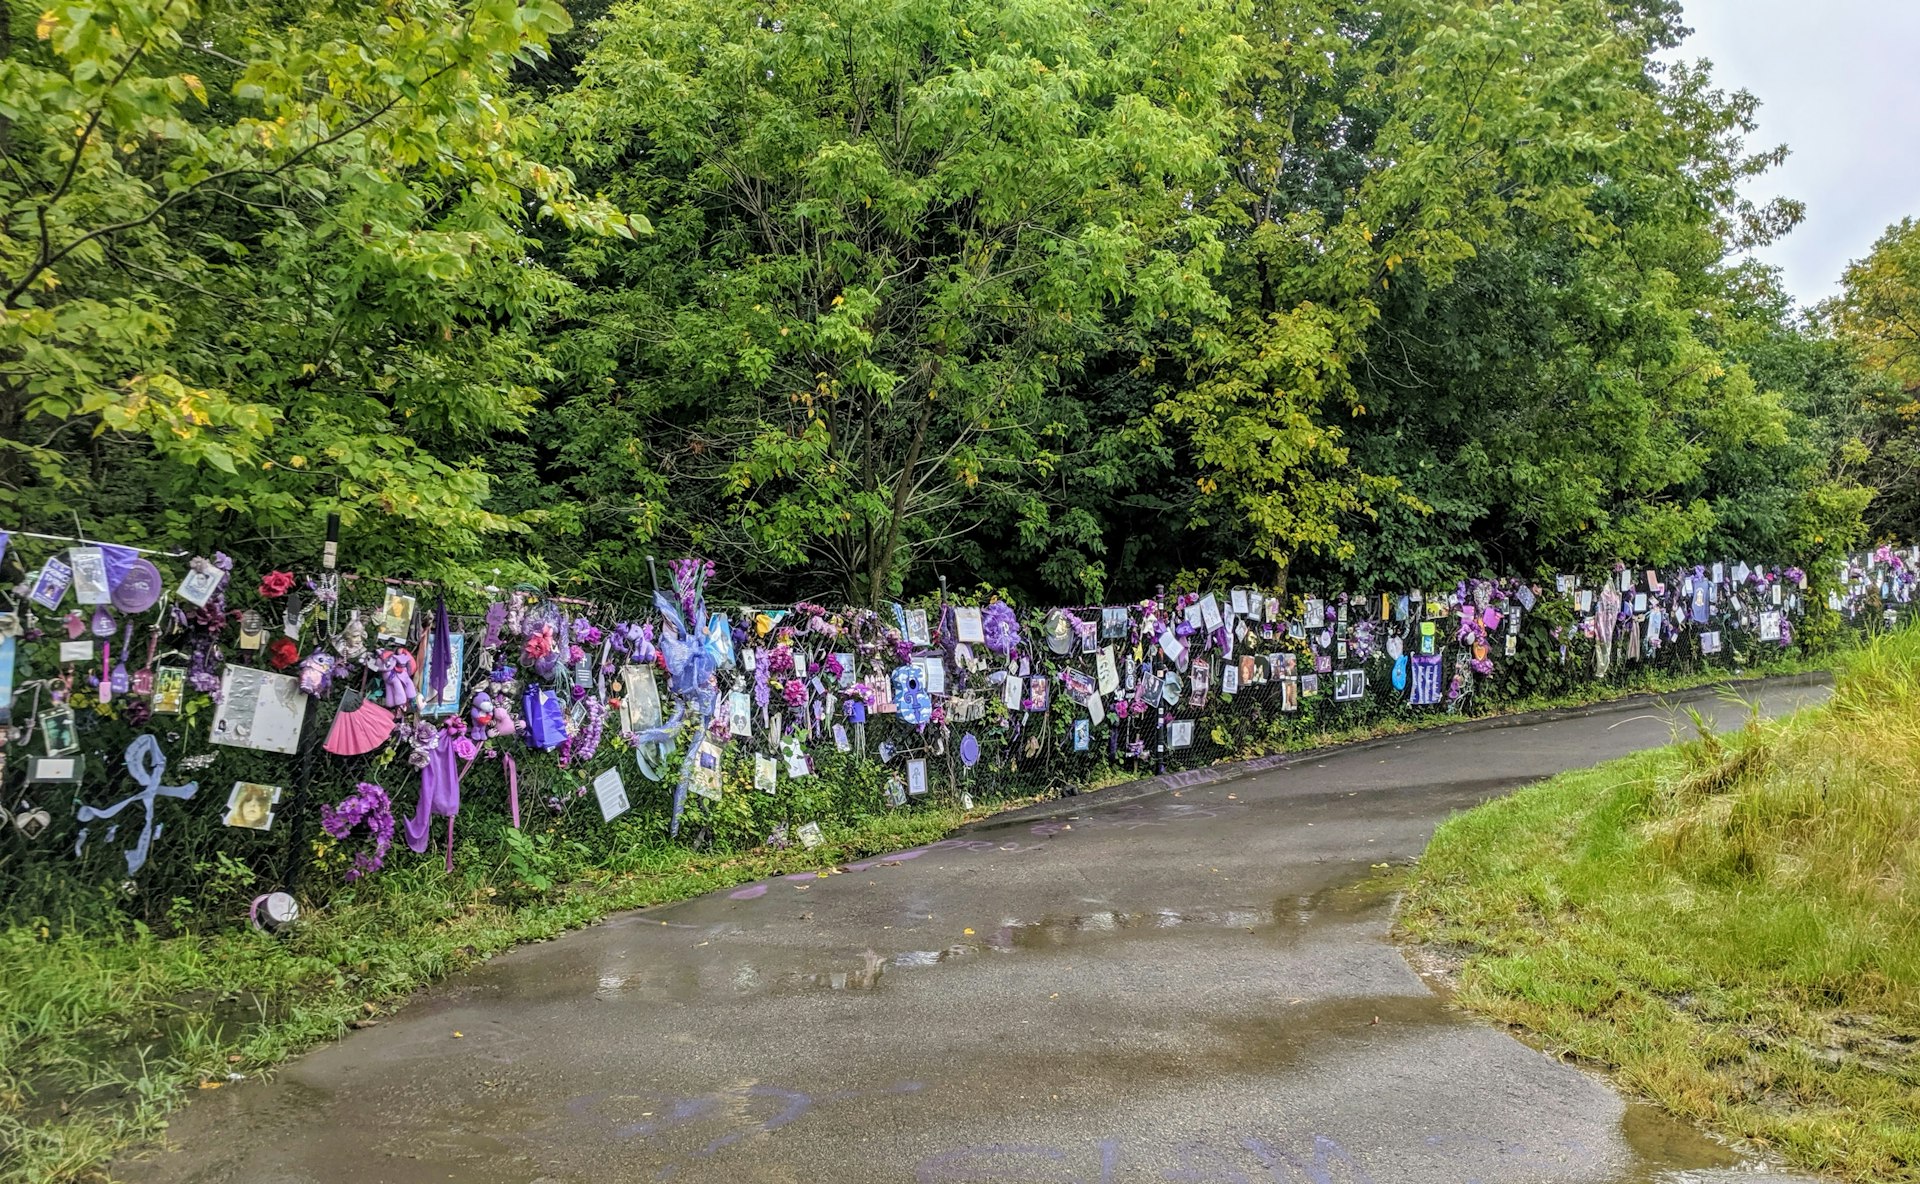 A chainlink fence is lined with purple memorabilia and other tributes to the musician Prince near Paisley Park in Minneapolis, Minnesota